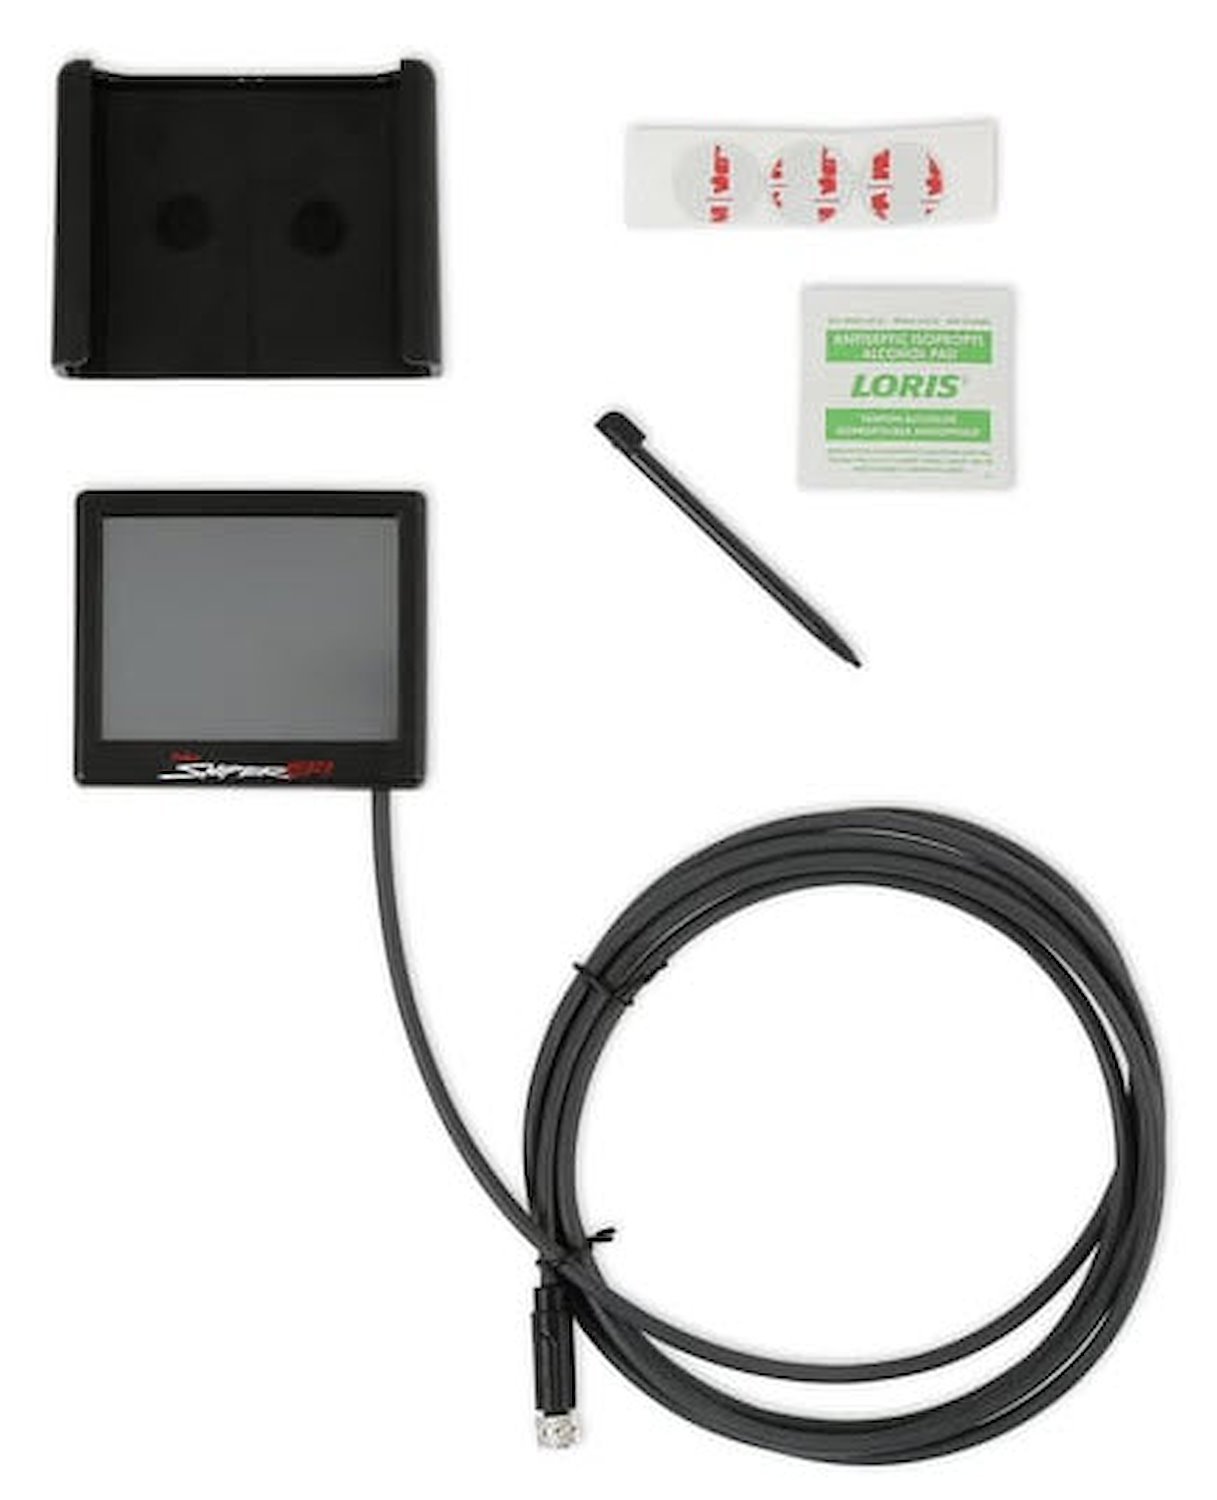 553-202 LCD Handheld Controller Interface w/3.50 in. Touch Screen for Sniper 2 EFI Conversion